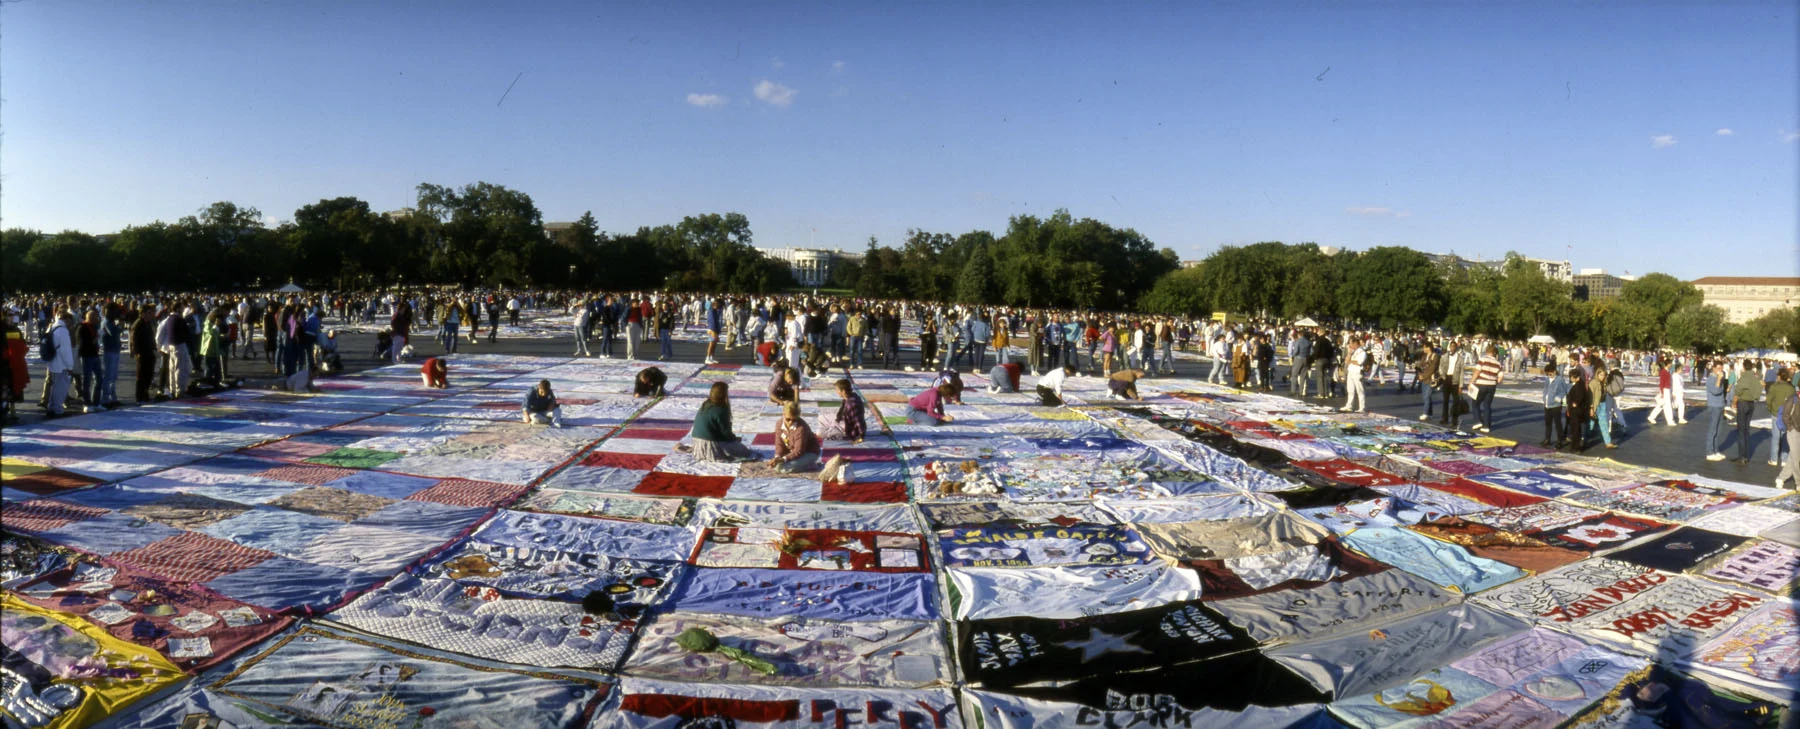 A wide color photograph showing a wide view of dozens of colorful, hand-painted quilts on the grass in Washington, D.C. Around and on the quilts stand dozens of people. Behind them, a forest of green trees is visible.